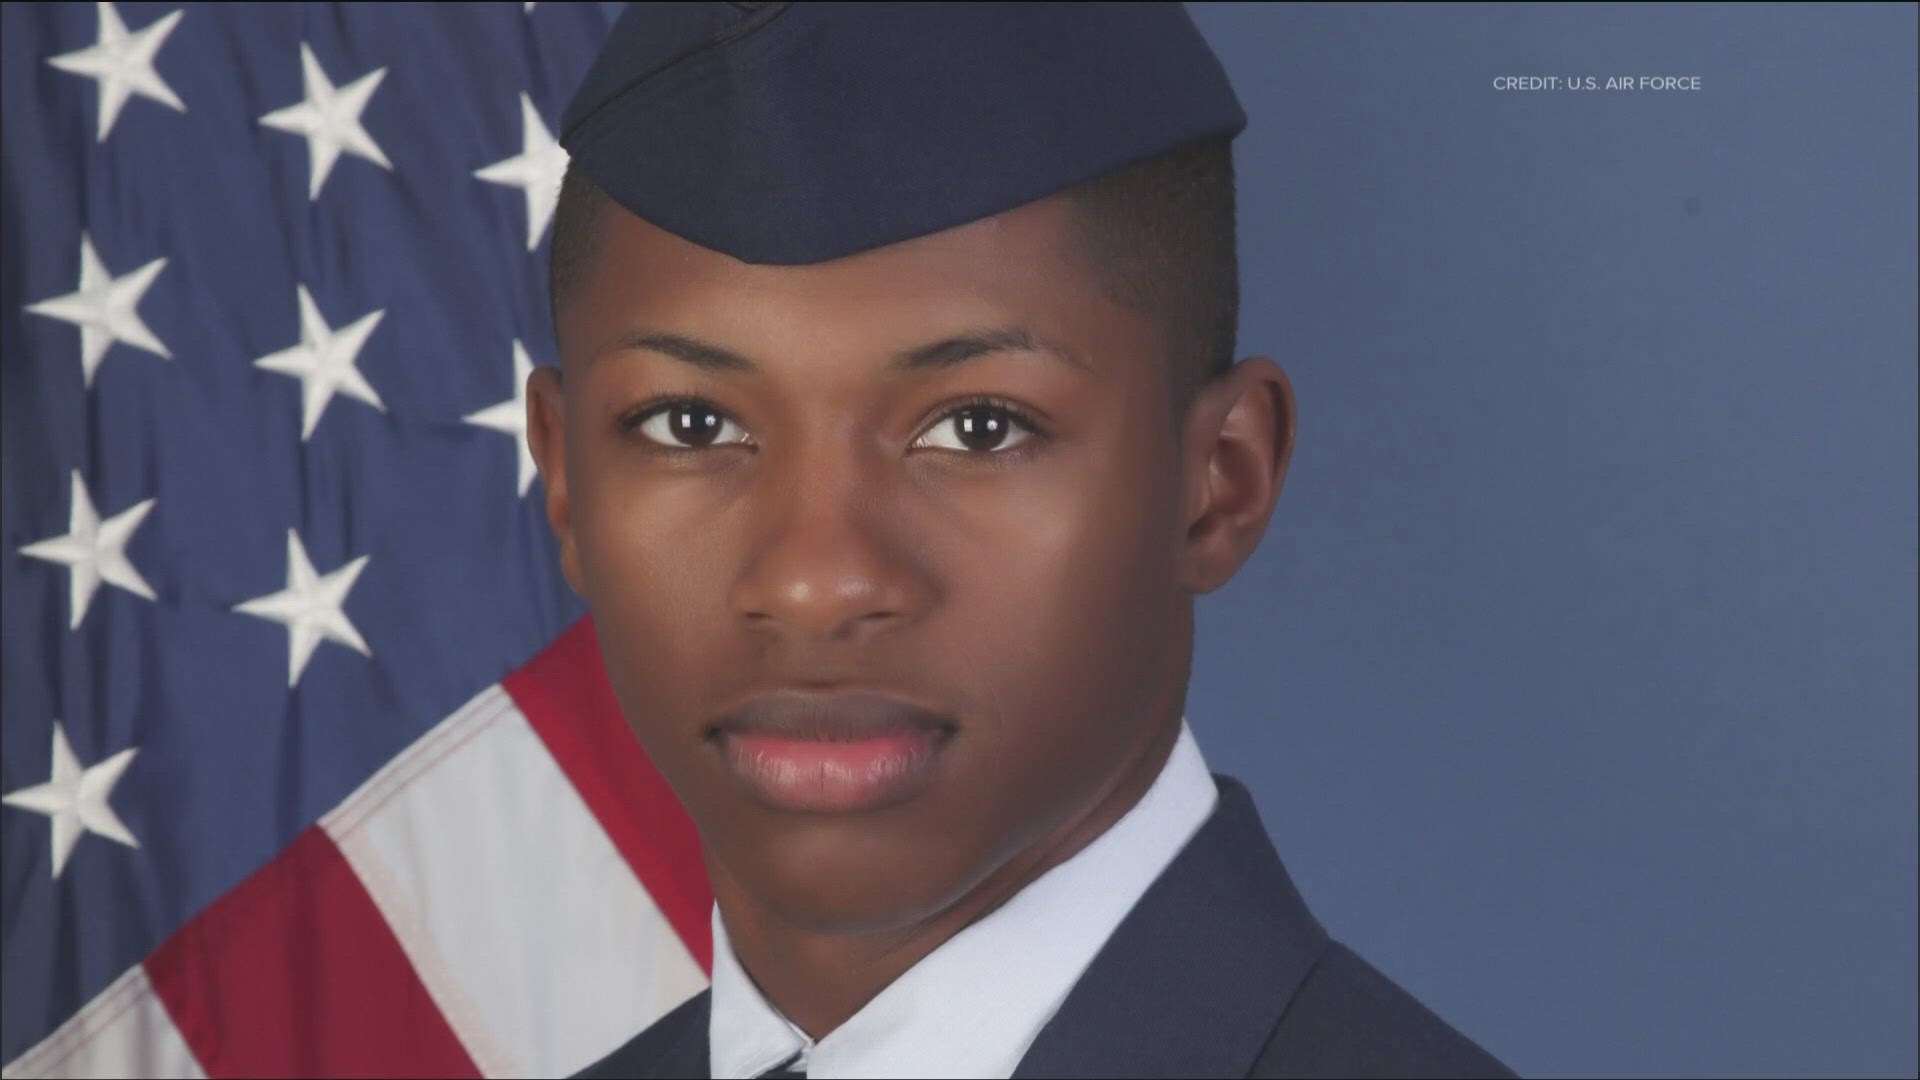 23-year-old Sr. Airman Roger Fortson will be laid to rest Friday at New Birth missionary Baptist in Stonecrest.